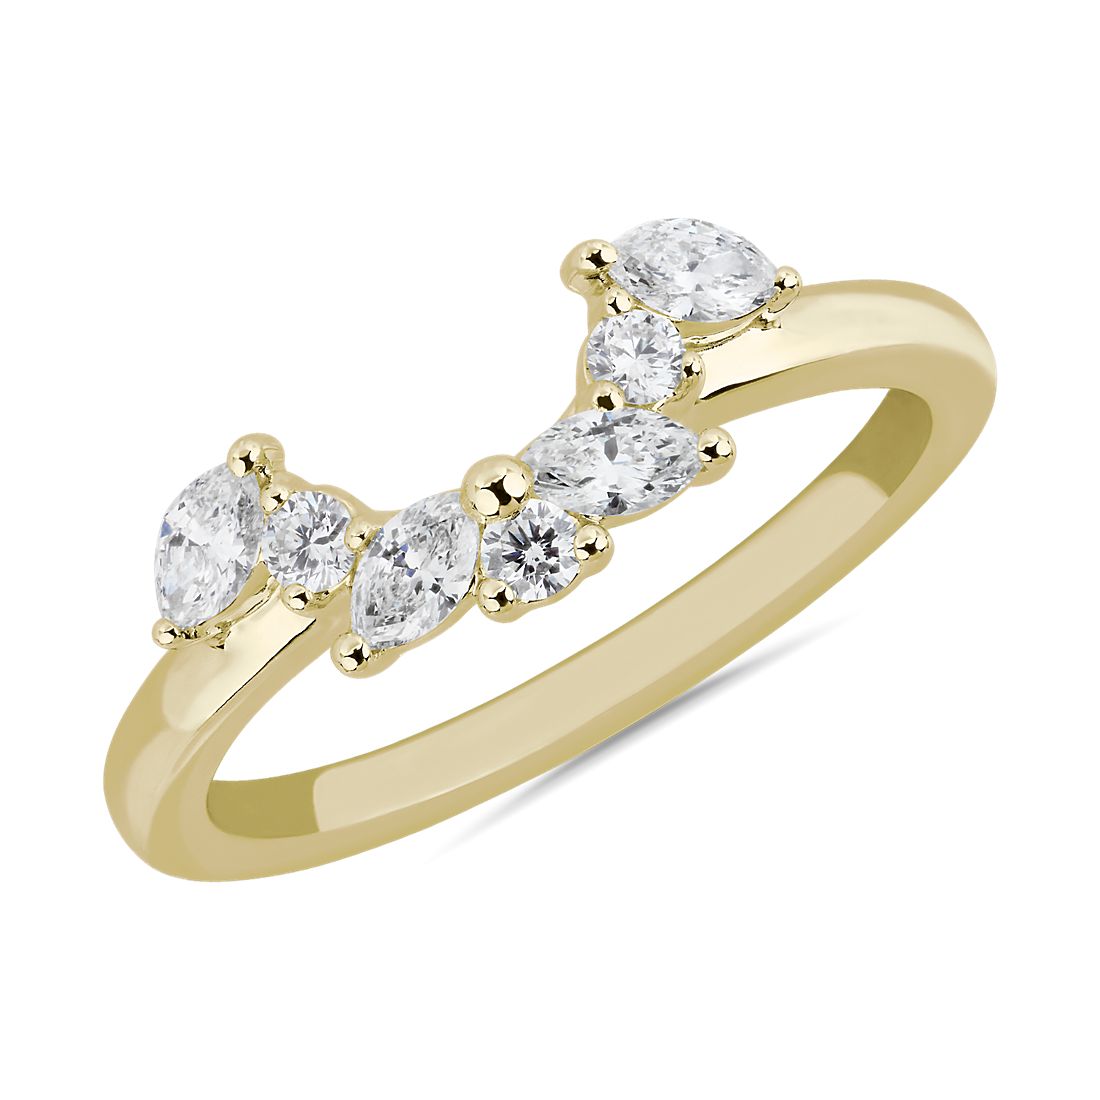 Romantic Marquise Curved Semi-Halo Diamond Wrap Ring in 14k Yellow Gold (0.29 ct. tw.)